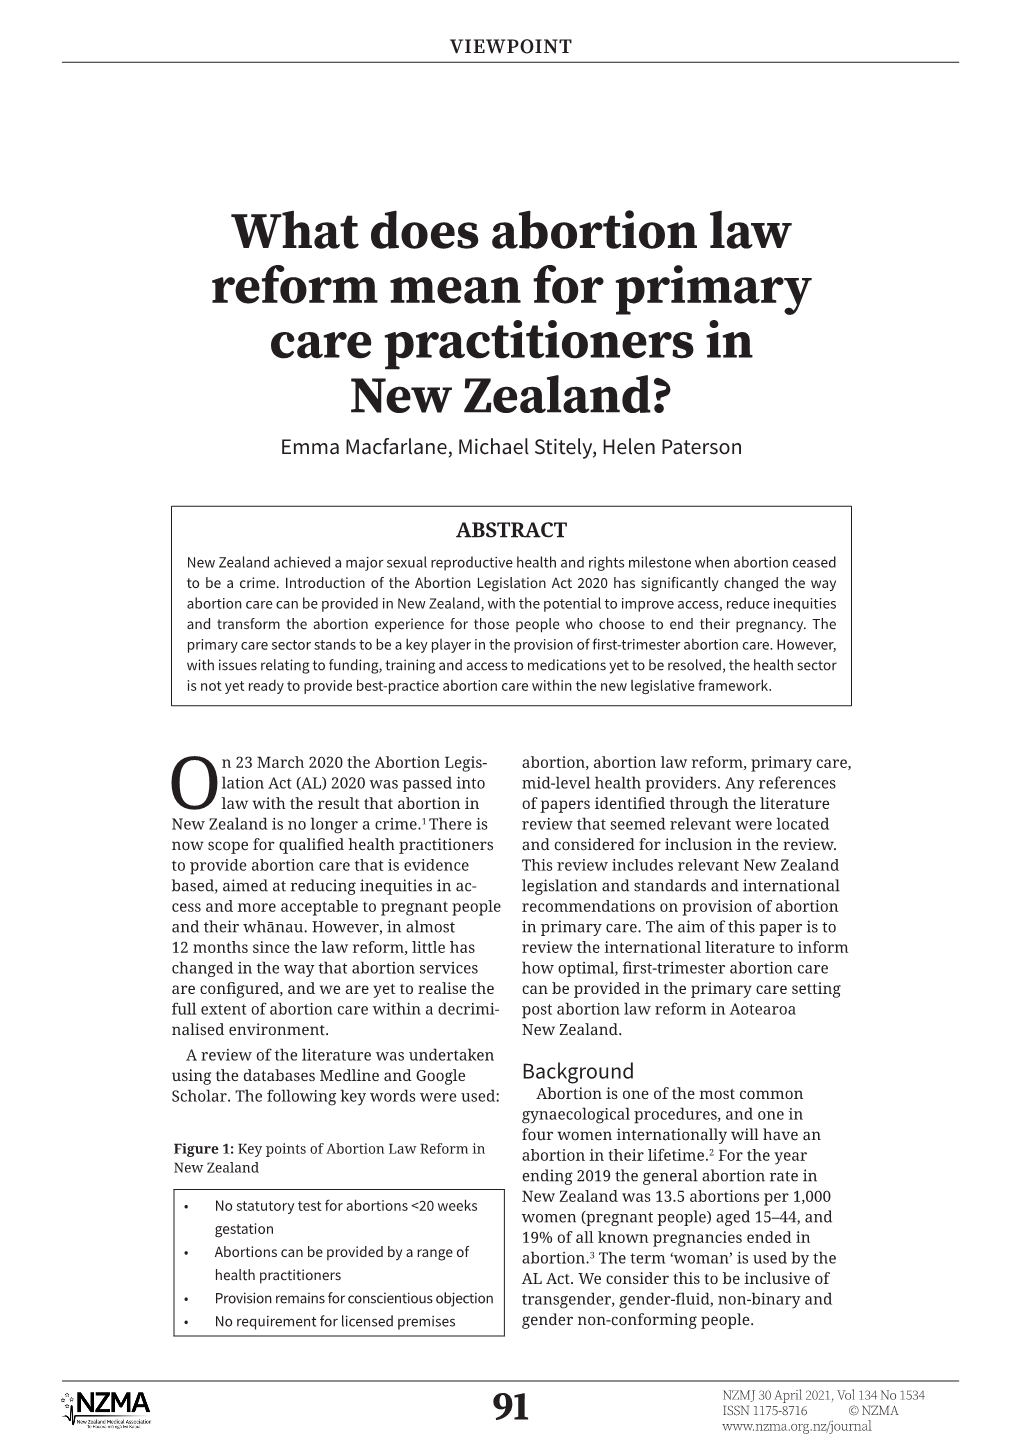 What Does Abortion Law Reform Mean for Primary Care Practitioners in New Zealand? Emma Macfarlane, Michael Stitely, Helen Paterson